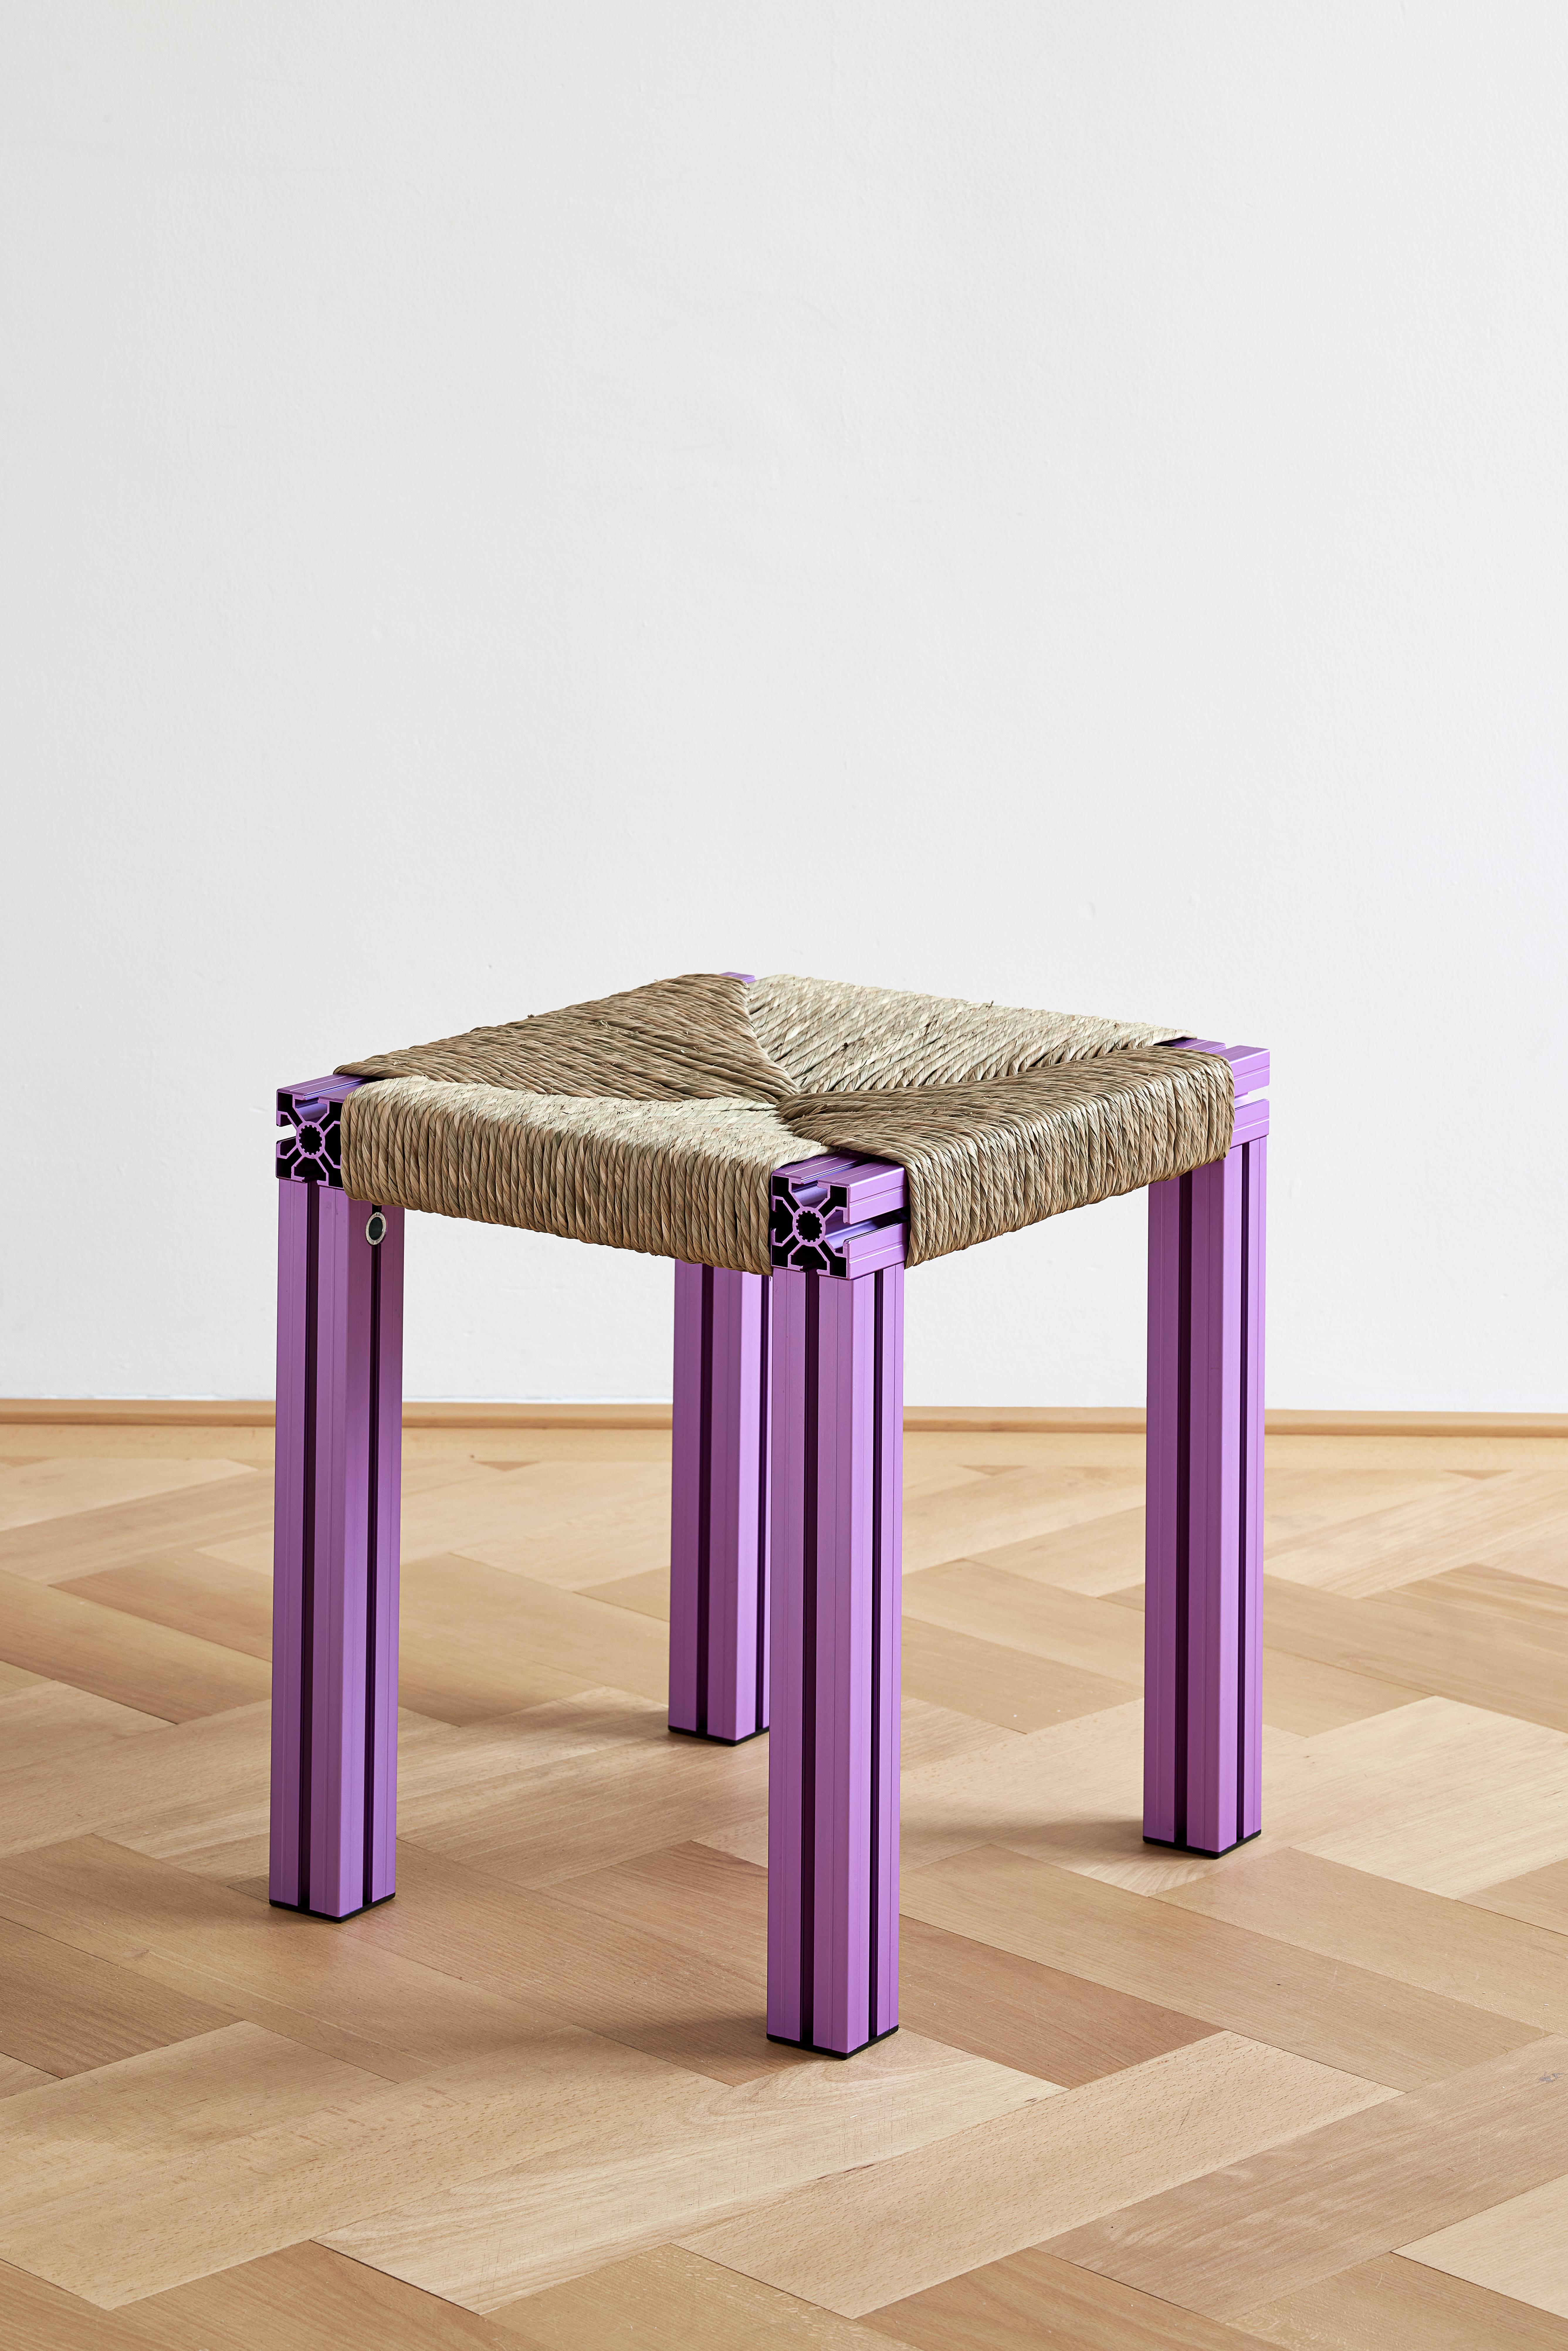 Anodized purple and rush weave wicker stool by Tino Seubert
Dimensions: D 43 x W 38 x H 45 cm.
Materials: Color anodized aluminum extrusions, rush weave.

Tino Seubert
When he first made his now signature wicker and aluminium stools and benches